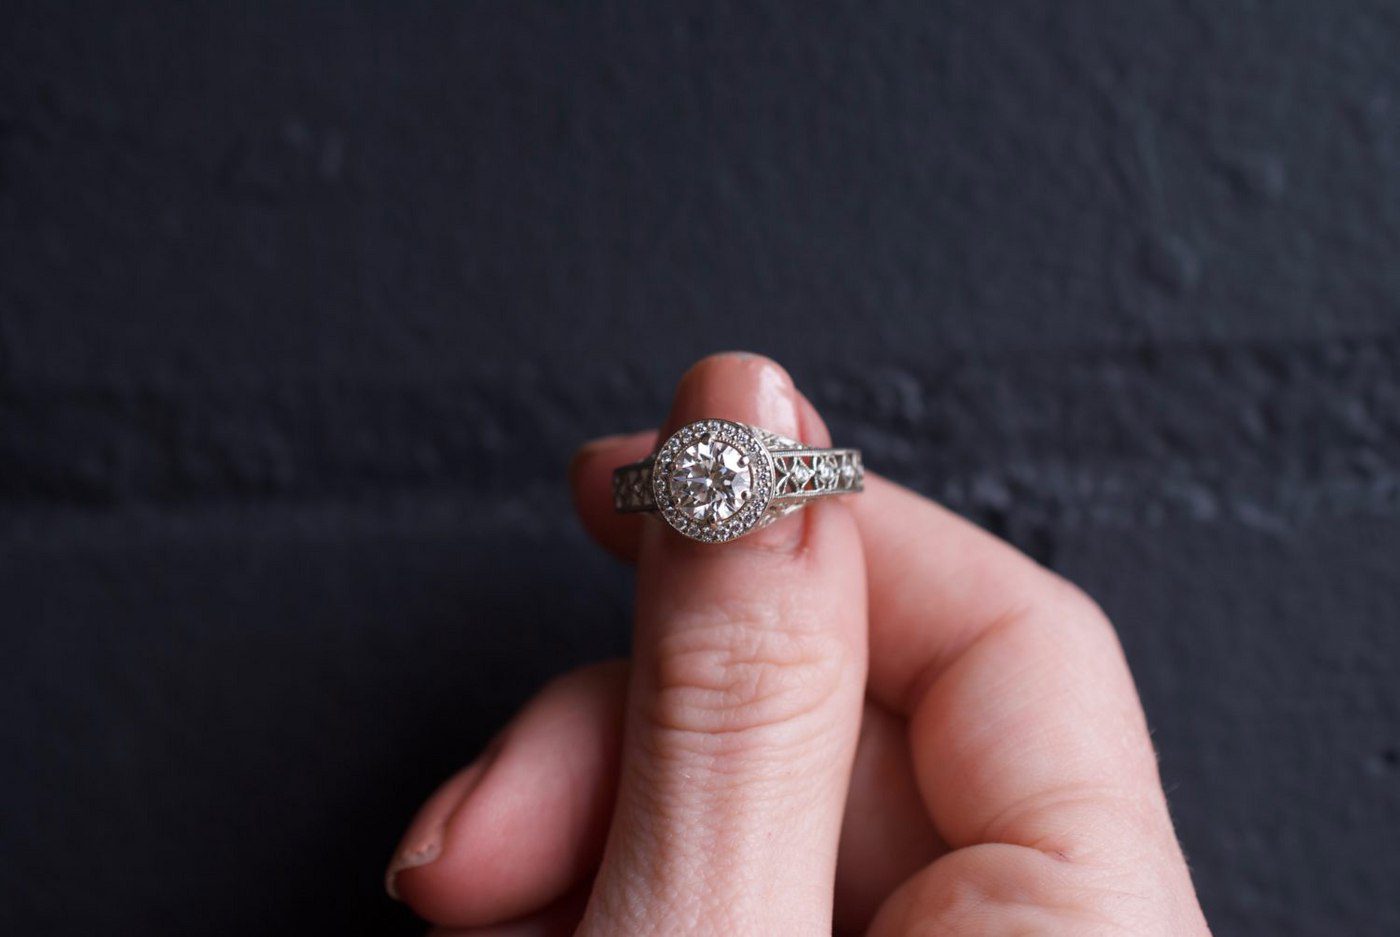 How to Figure Out What Engagement Ring You Want